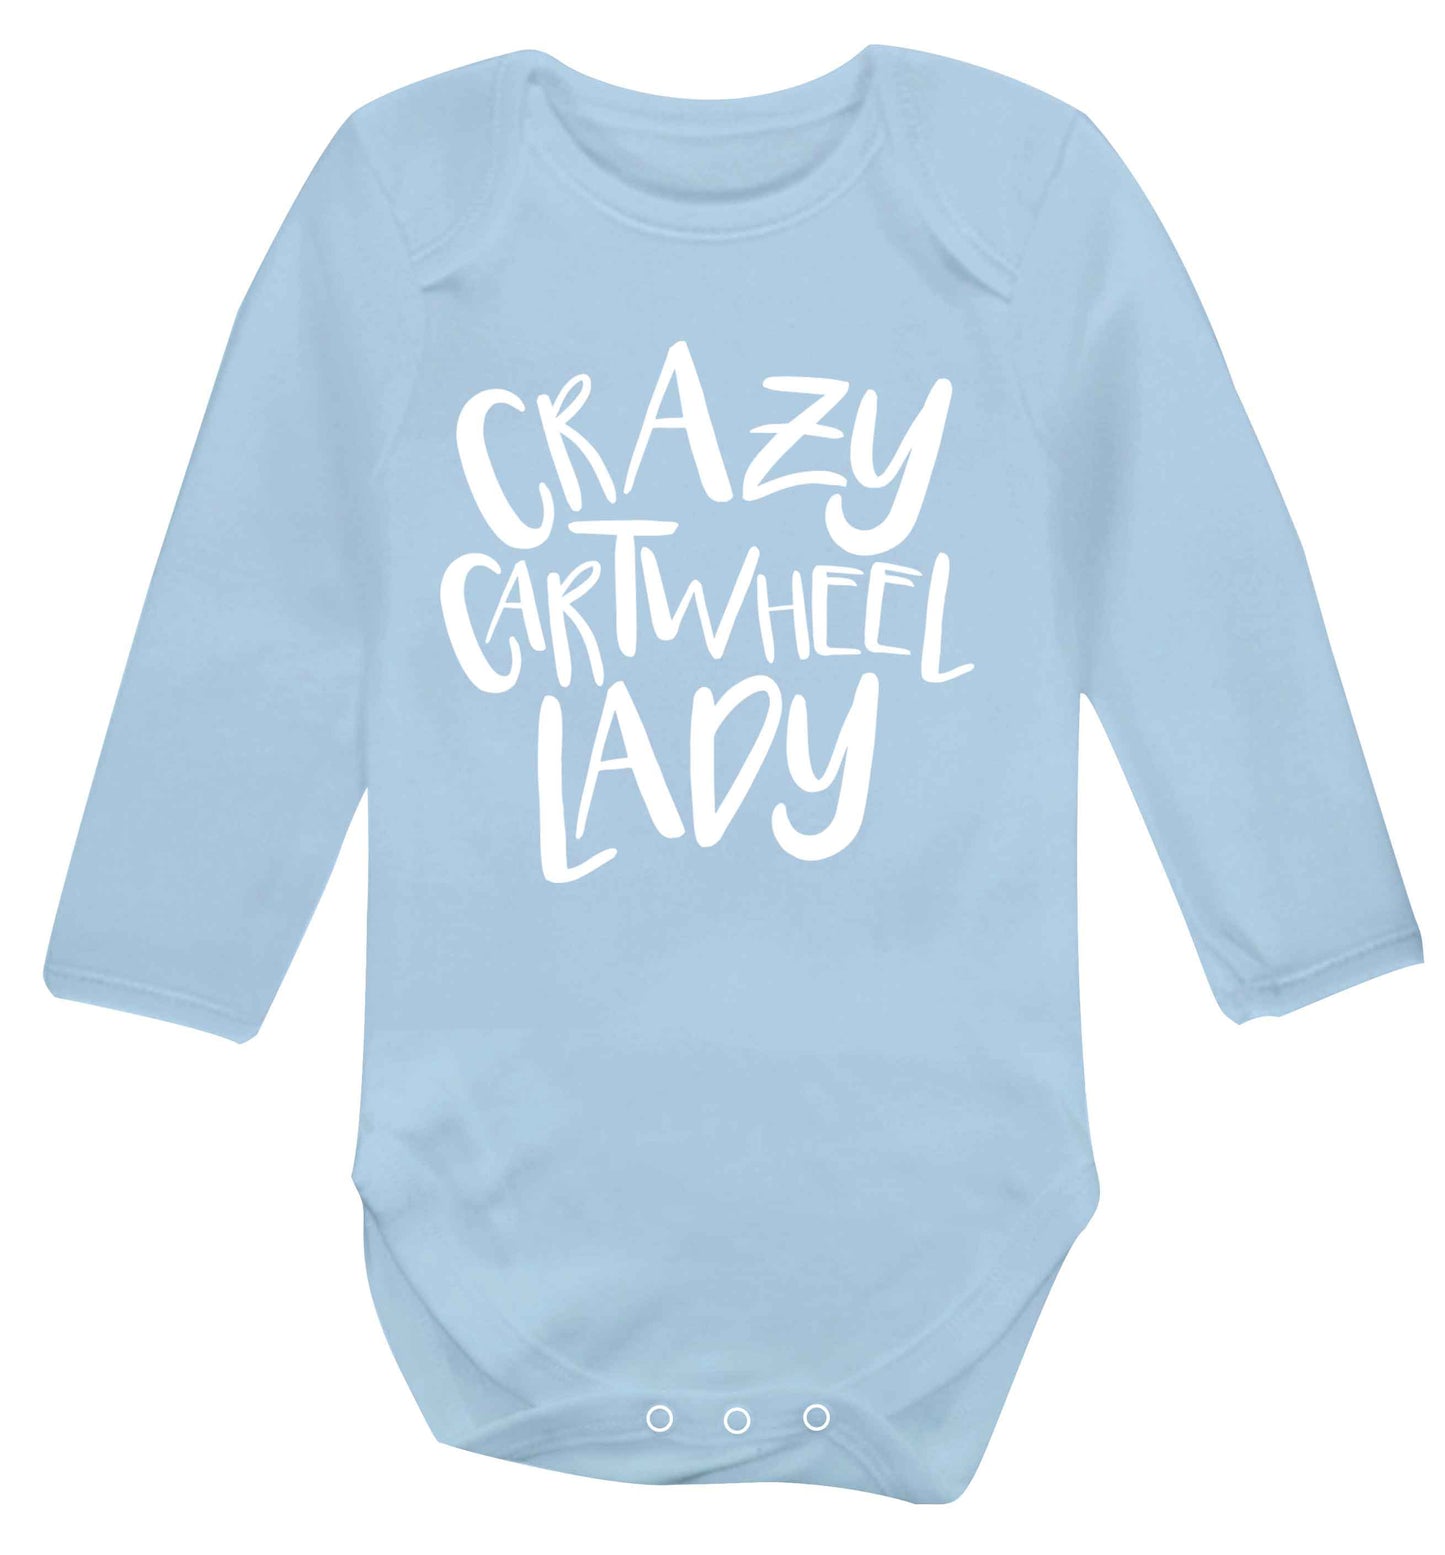 Crazy cartwheel lady Baby Vest long sleeved pale blue 6-12 months